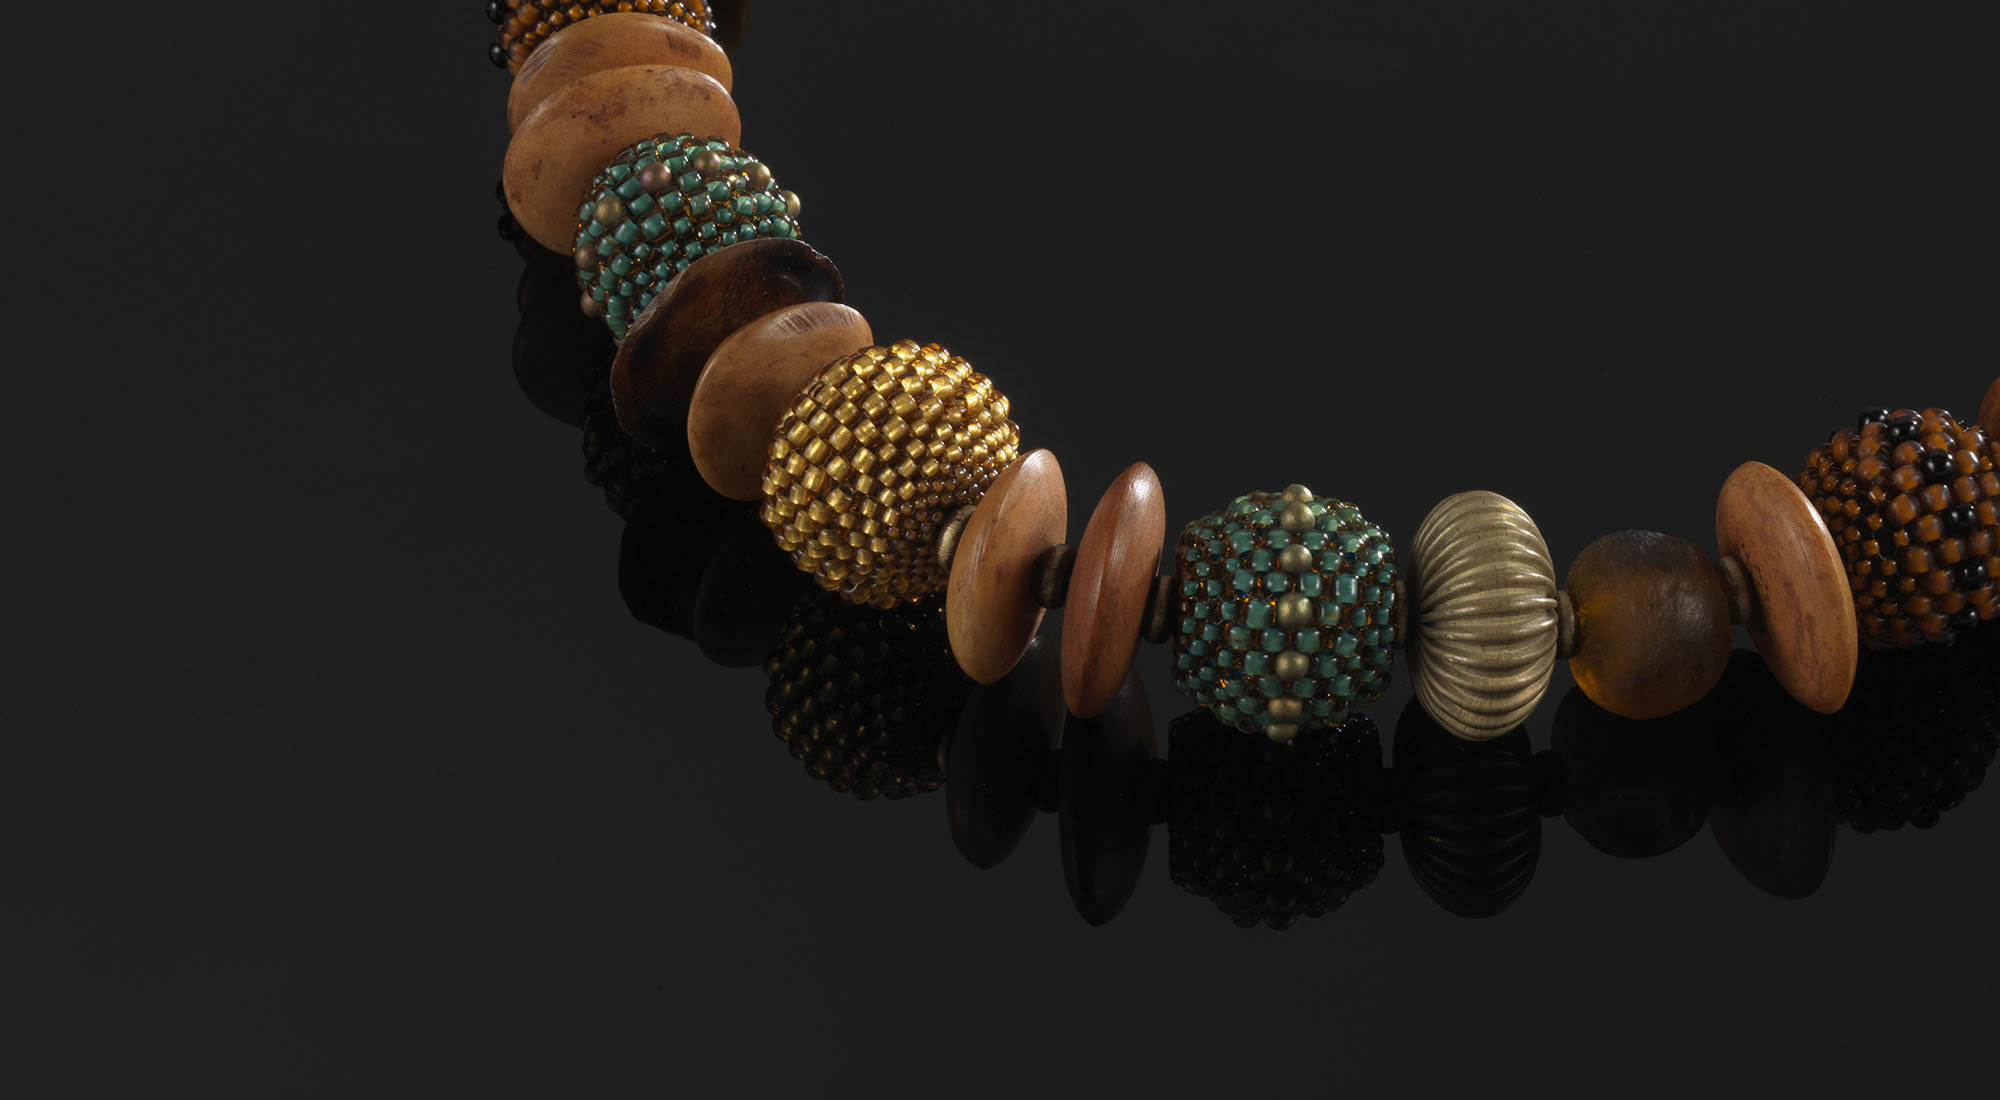 Savannah—Hand-stitched 20mm seeded beads and vintage African trade beads.